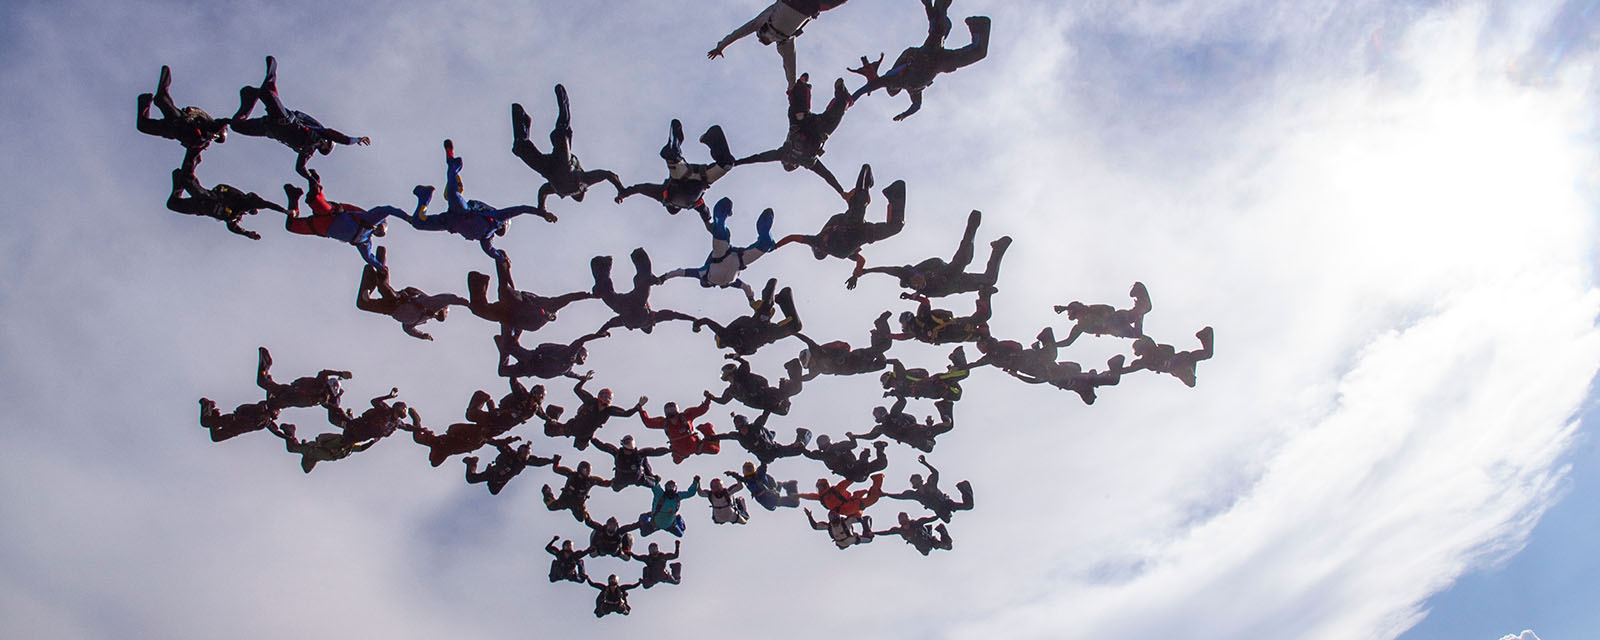 Big skydive formation at cloudy sky, togetherness concept.